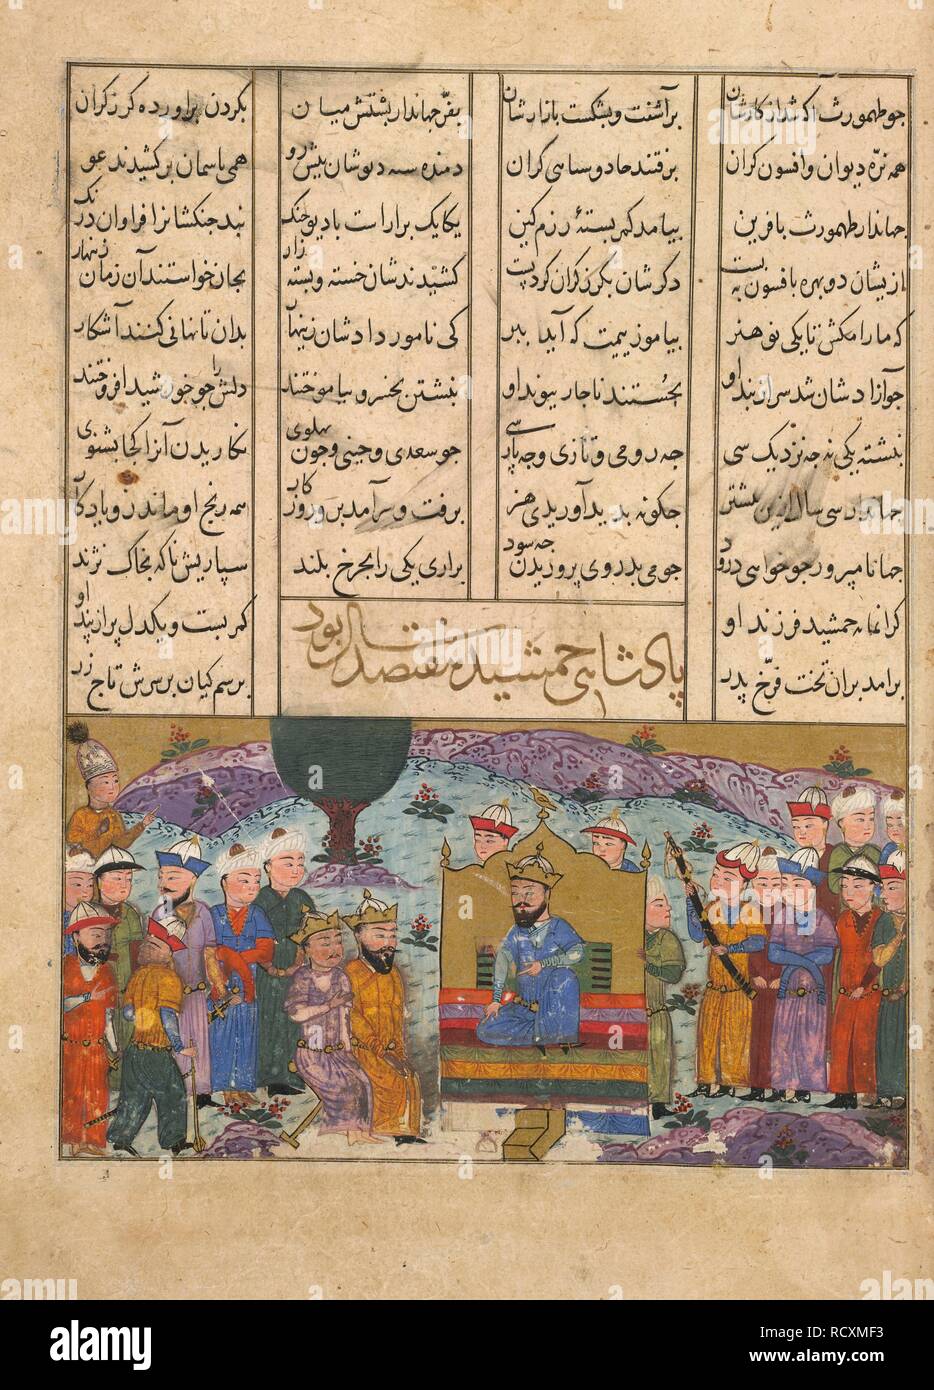 Jamshid enthroned. Shahnama. Iran, 1446. Jamshid enthroned. A miniature painting from a fifteenth century manuscript of the epic poem of Shahnama.  Image taken from Shahnama.  Originally published/produced in Iran, 1446. . Source: Or. 12688, f.19. Language: Persian. Stock Photo